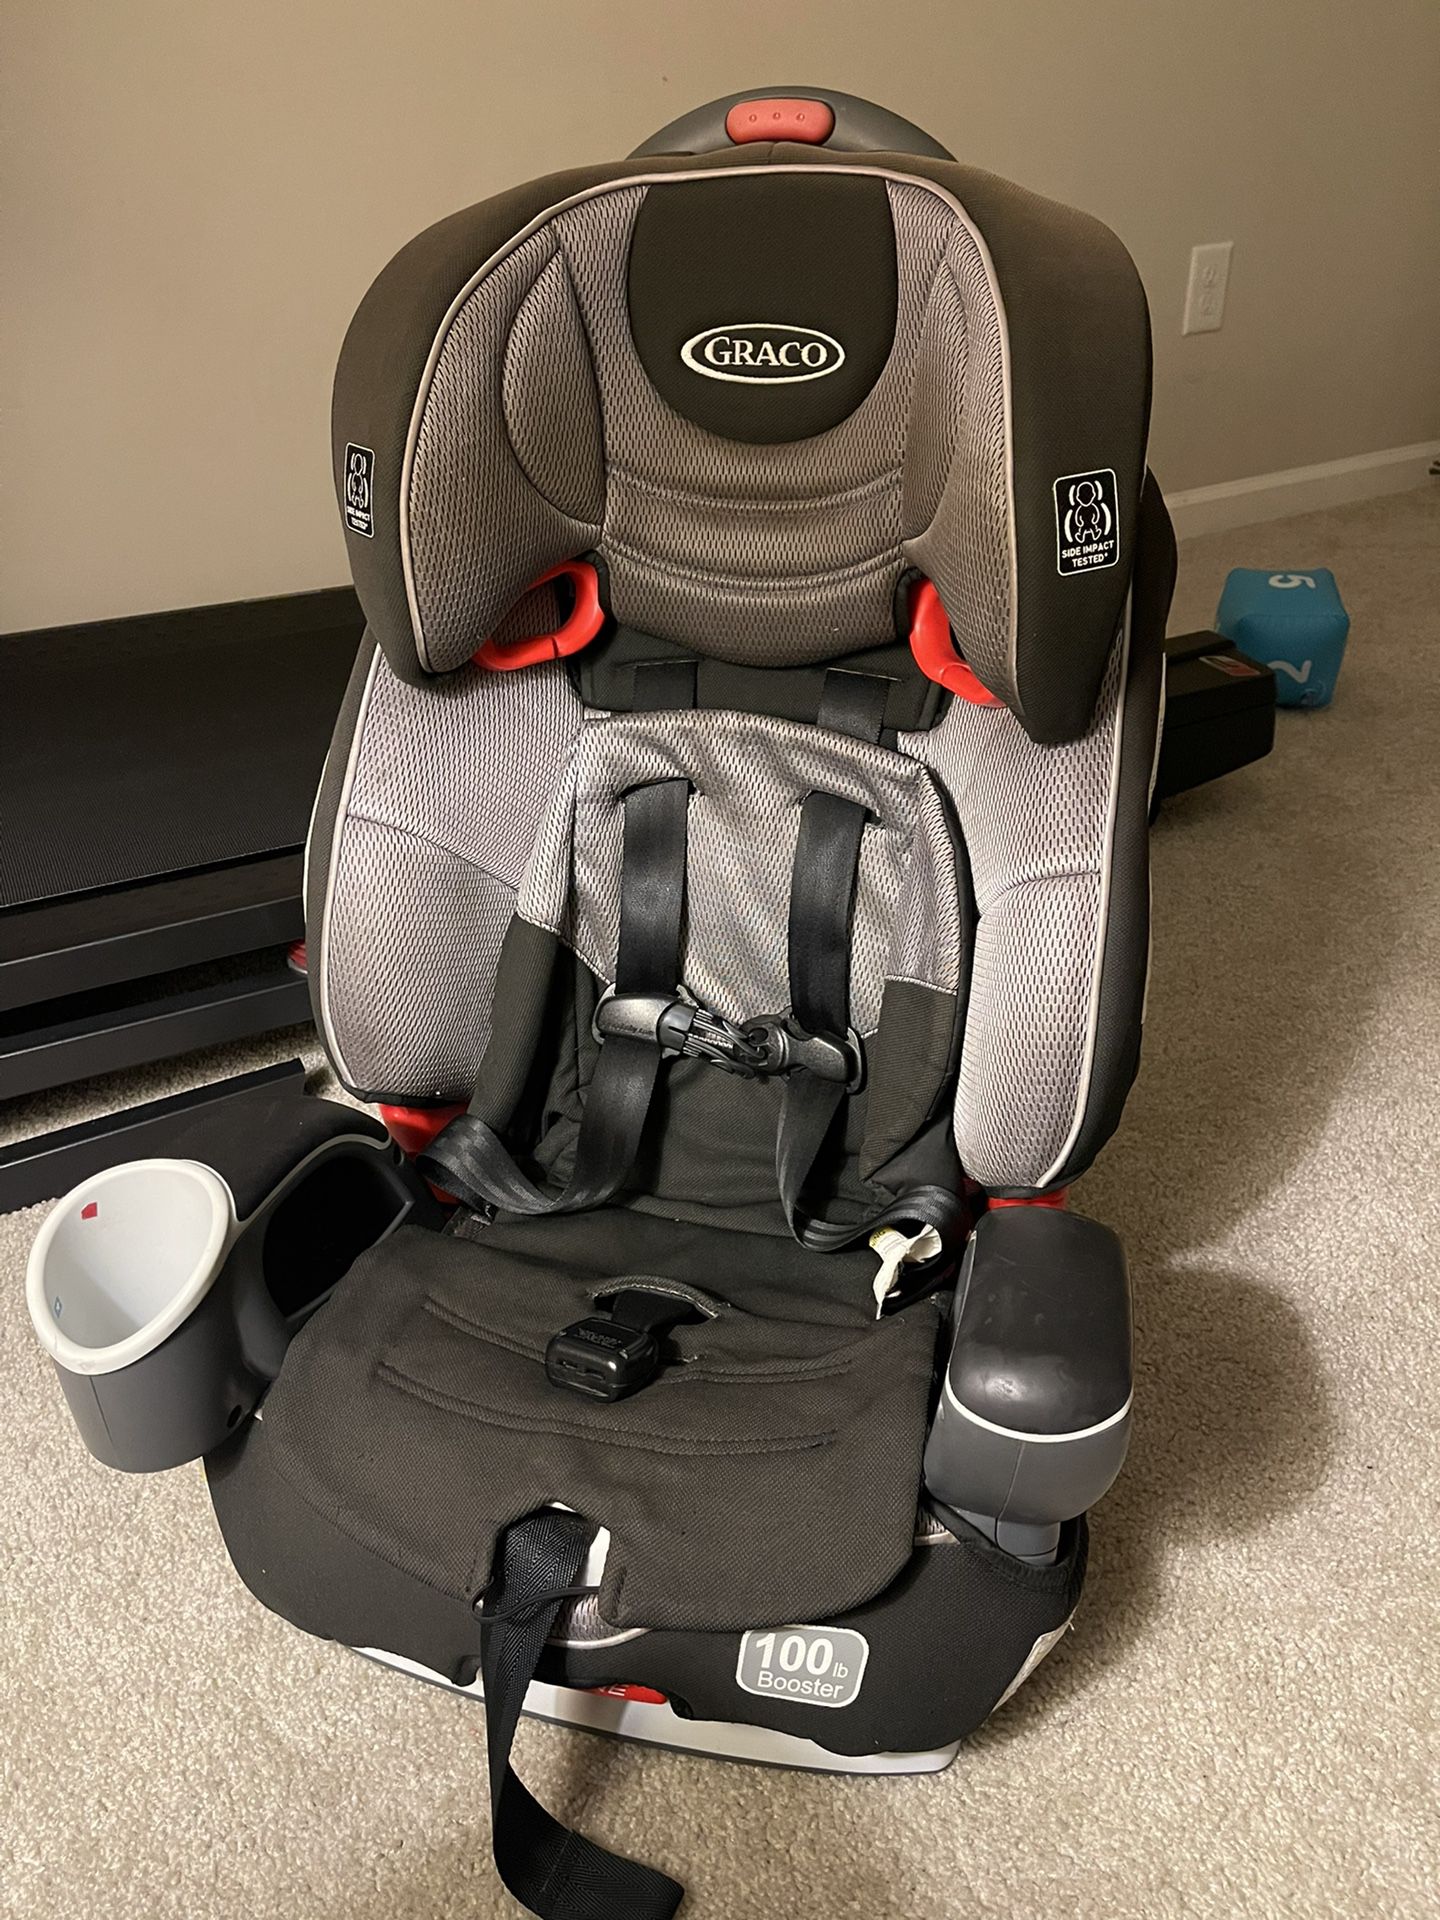 Graco® Nautilus® 100lb 3-in-1 Harness Booster Car Seat